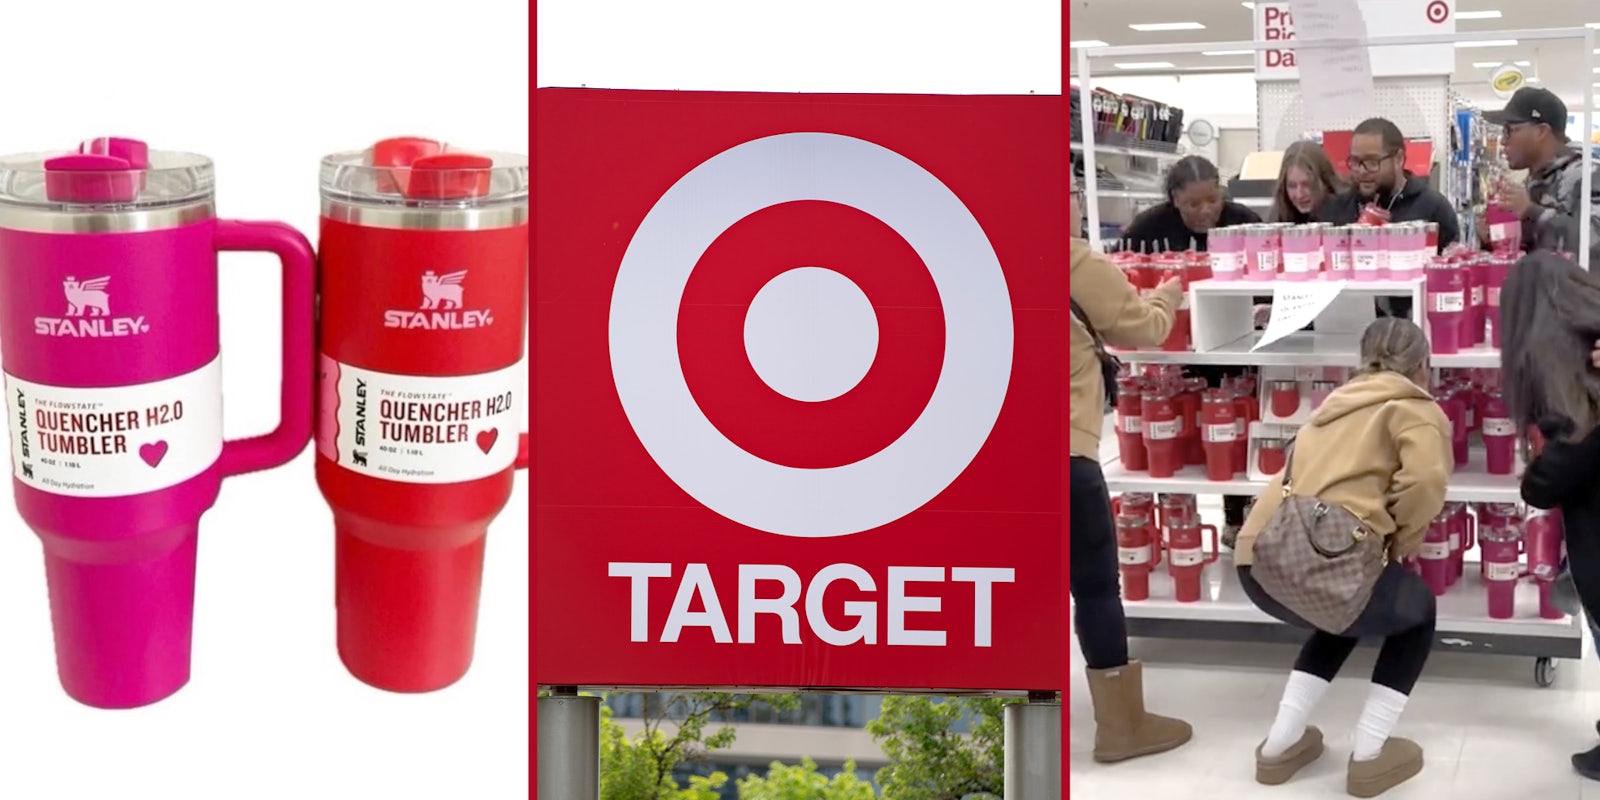 Valentine's Day Stanley Cup(l), Target sign(c), People grabbing Stanley cups at target(r)